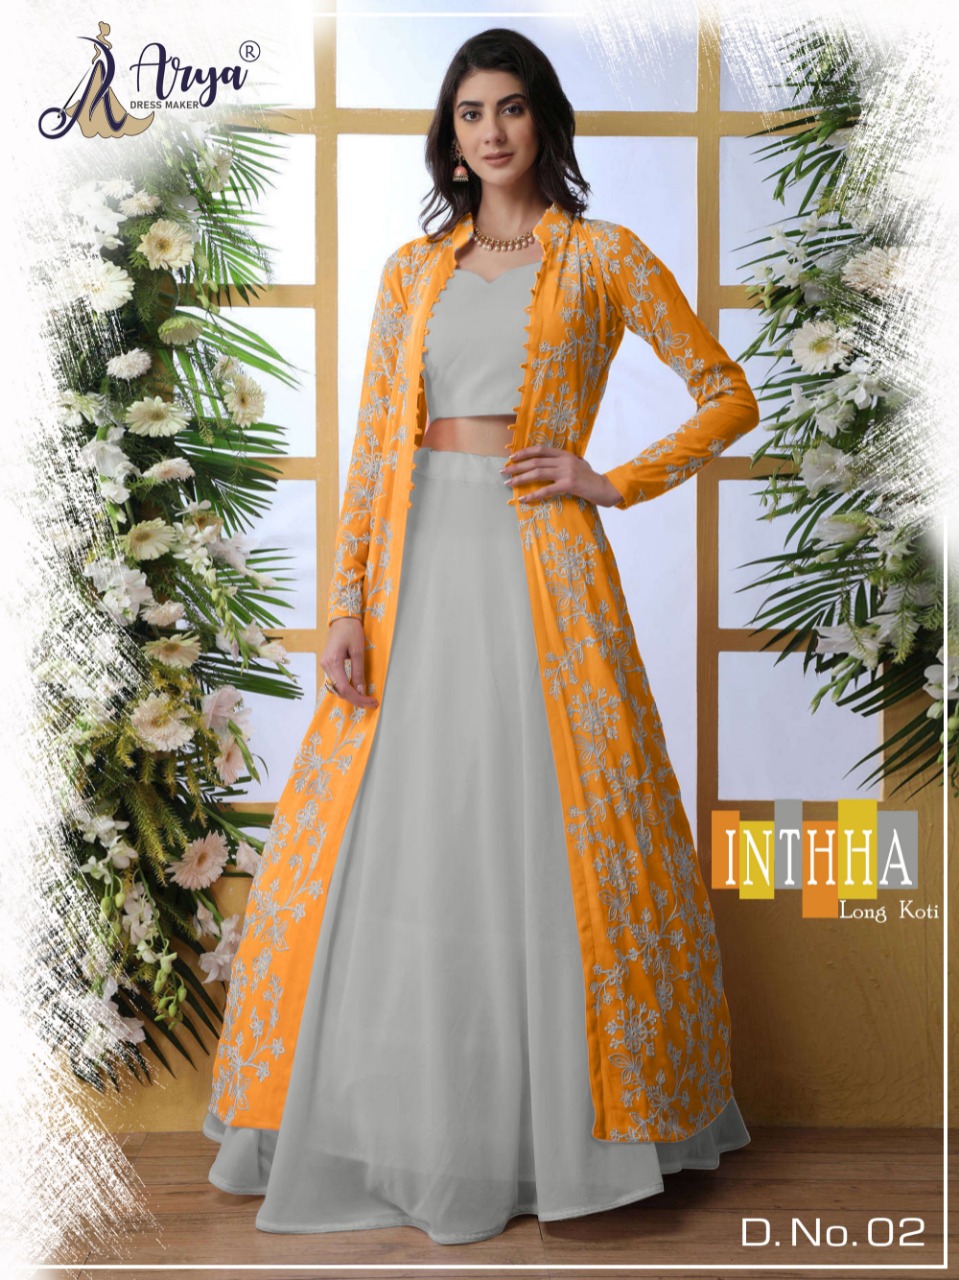 Aryadress Inthha Branded Crop Top Skirt Jacket Catalog Lowes